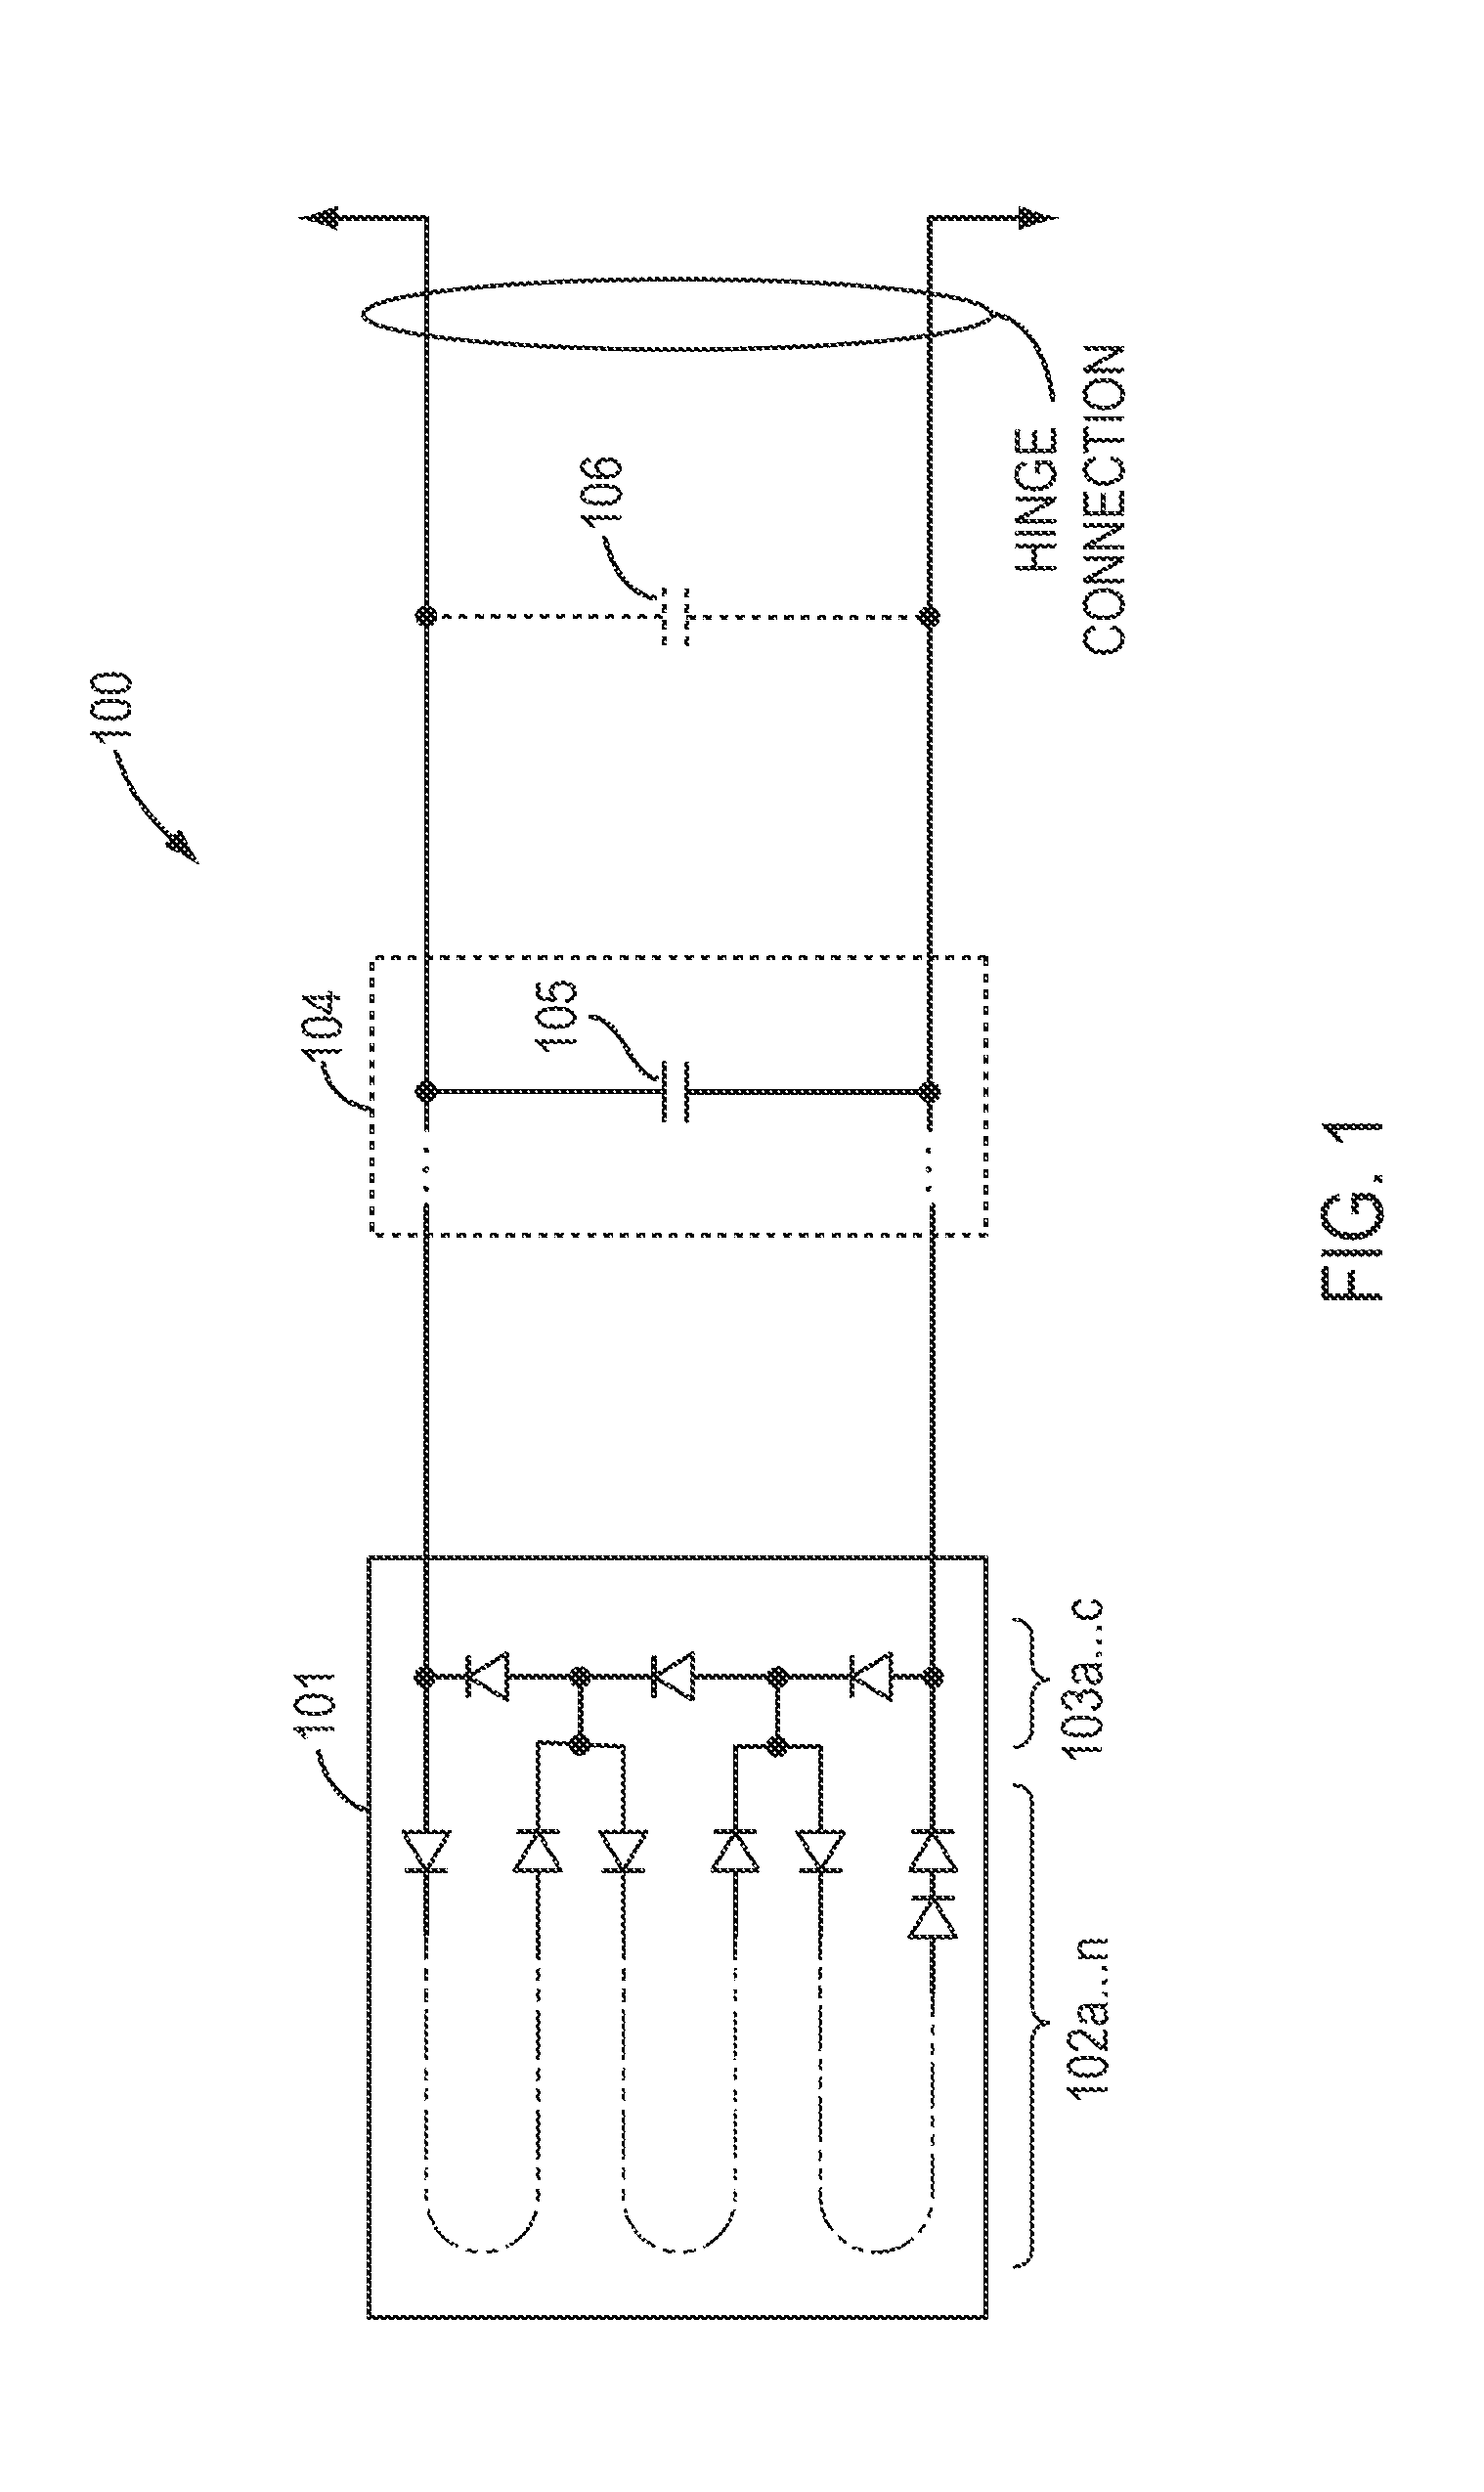 Anti-theft system and method for large solar panel systems